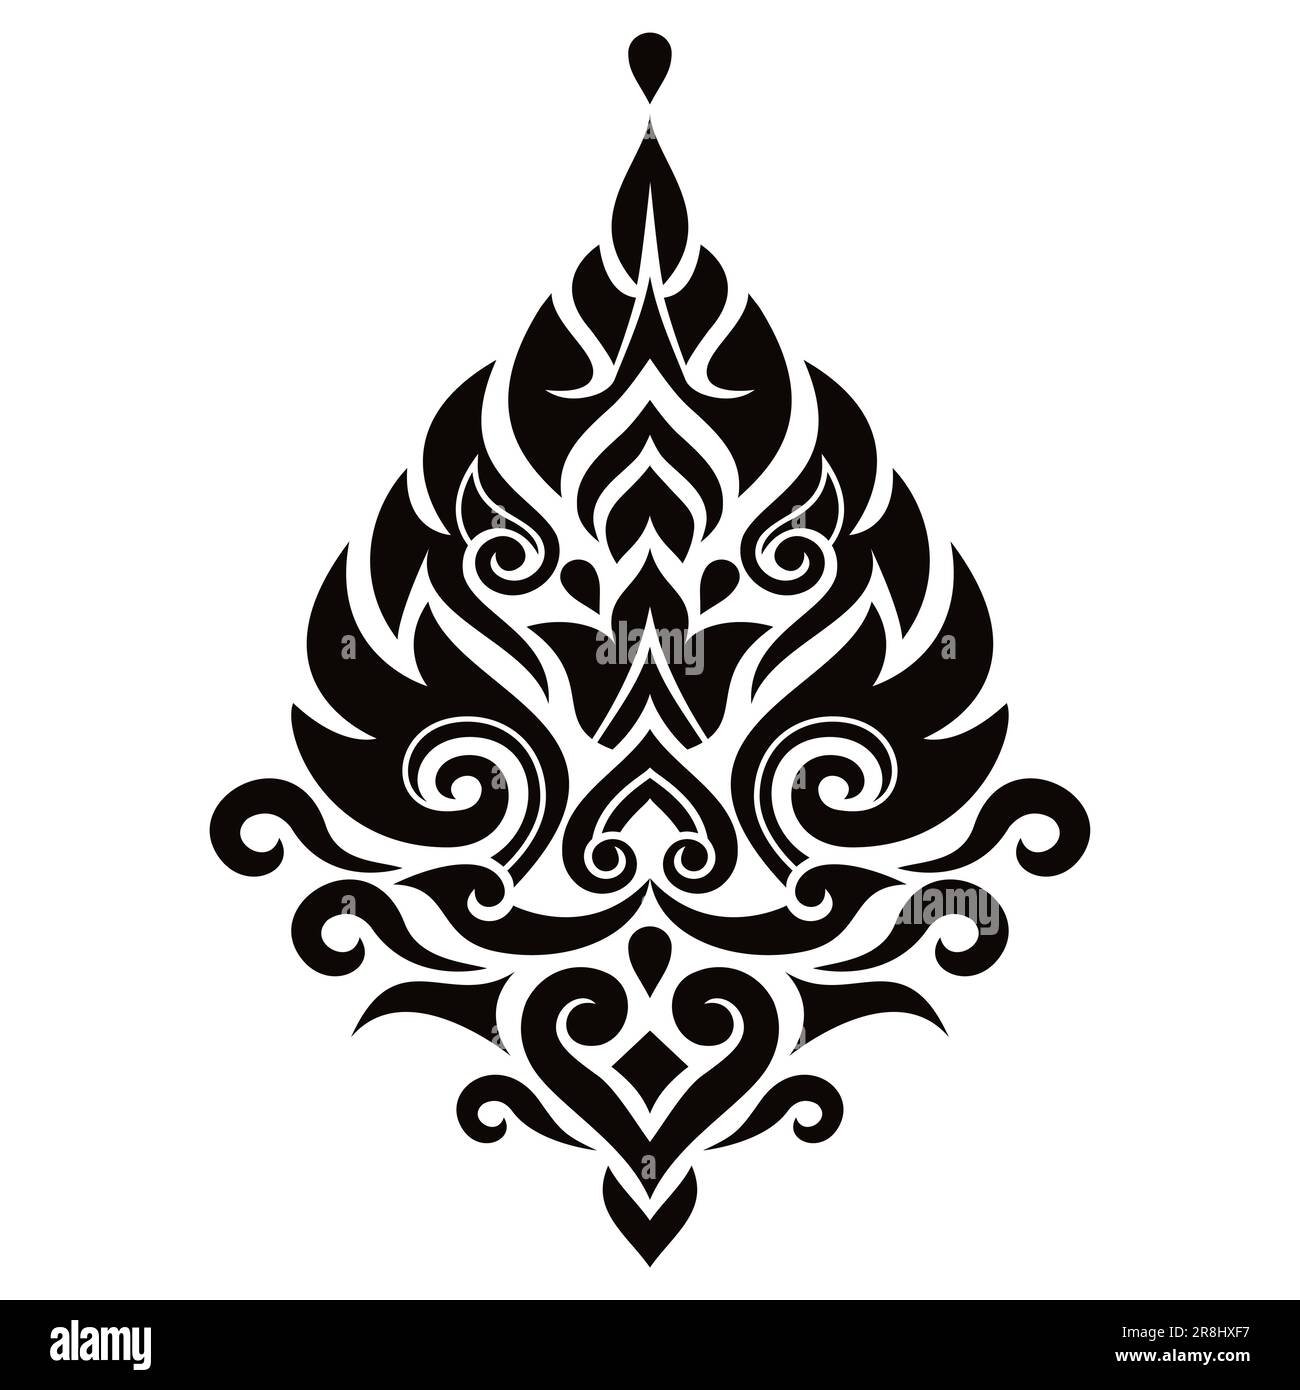 Thai vector traditional design element, ethnic decorative background from Thailand - folk art style in black and white Stock Vector